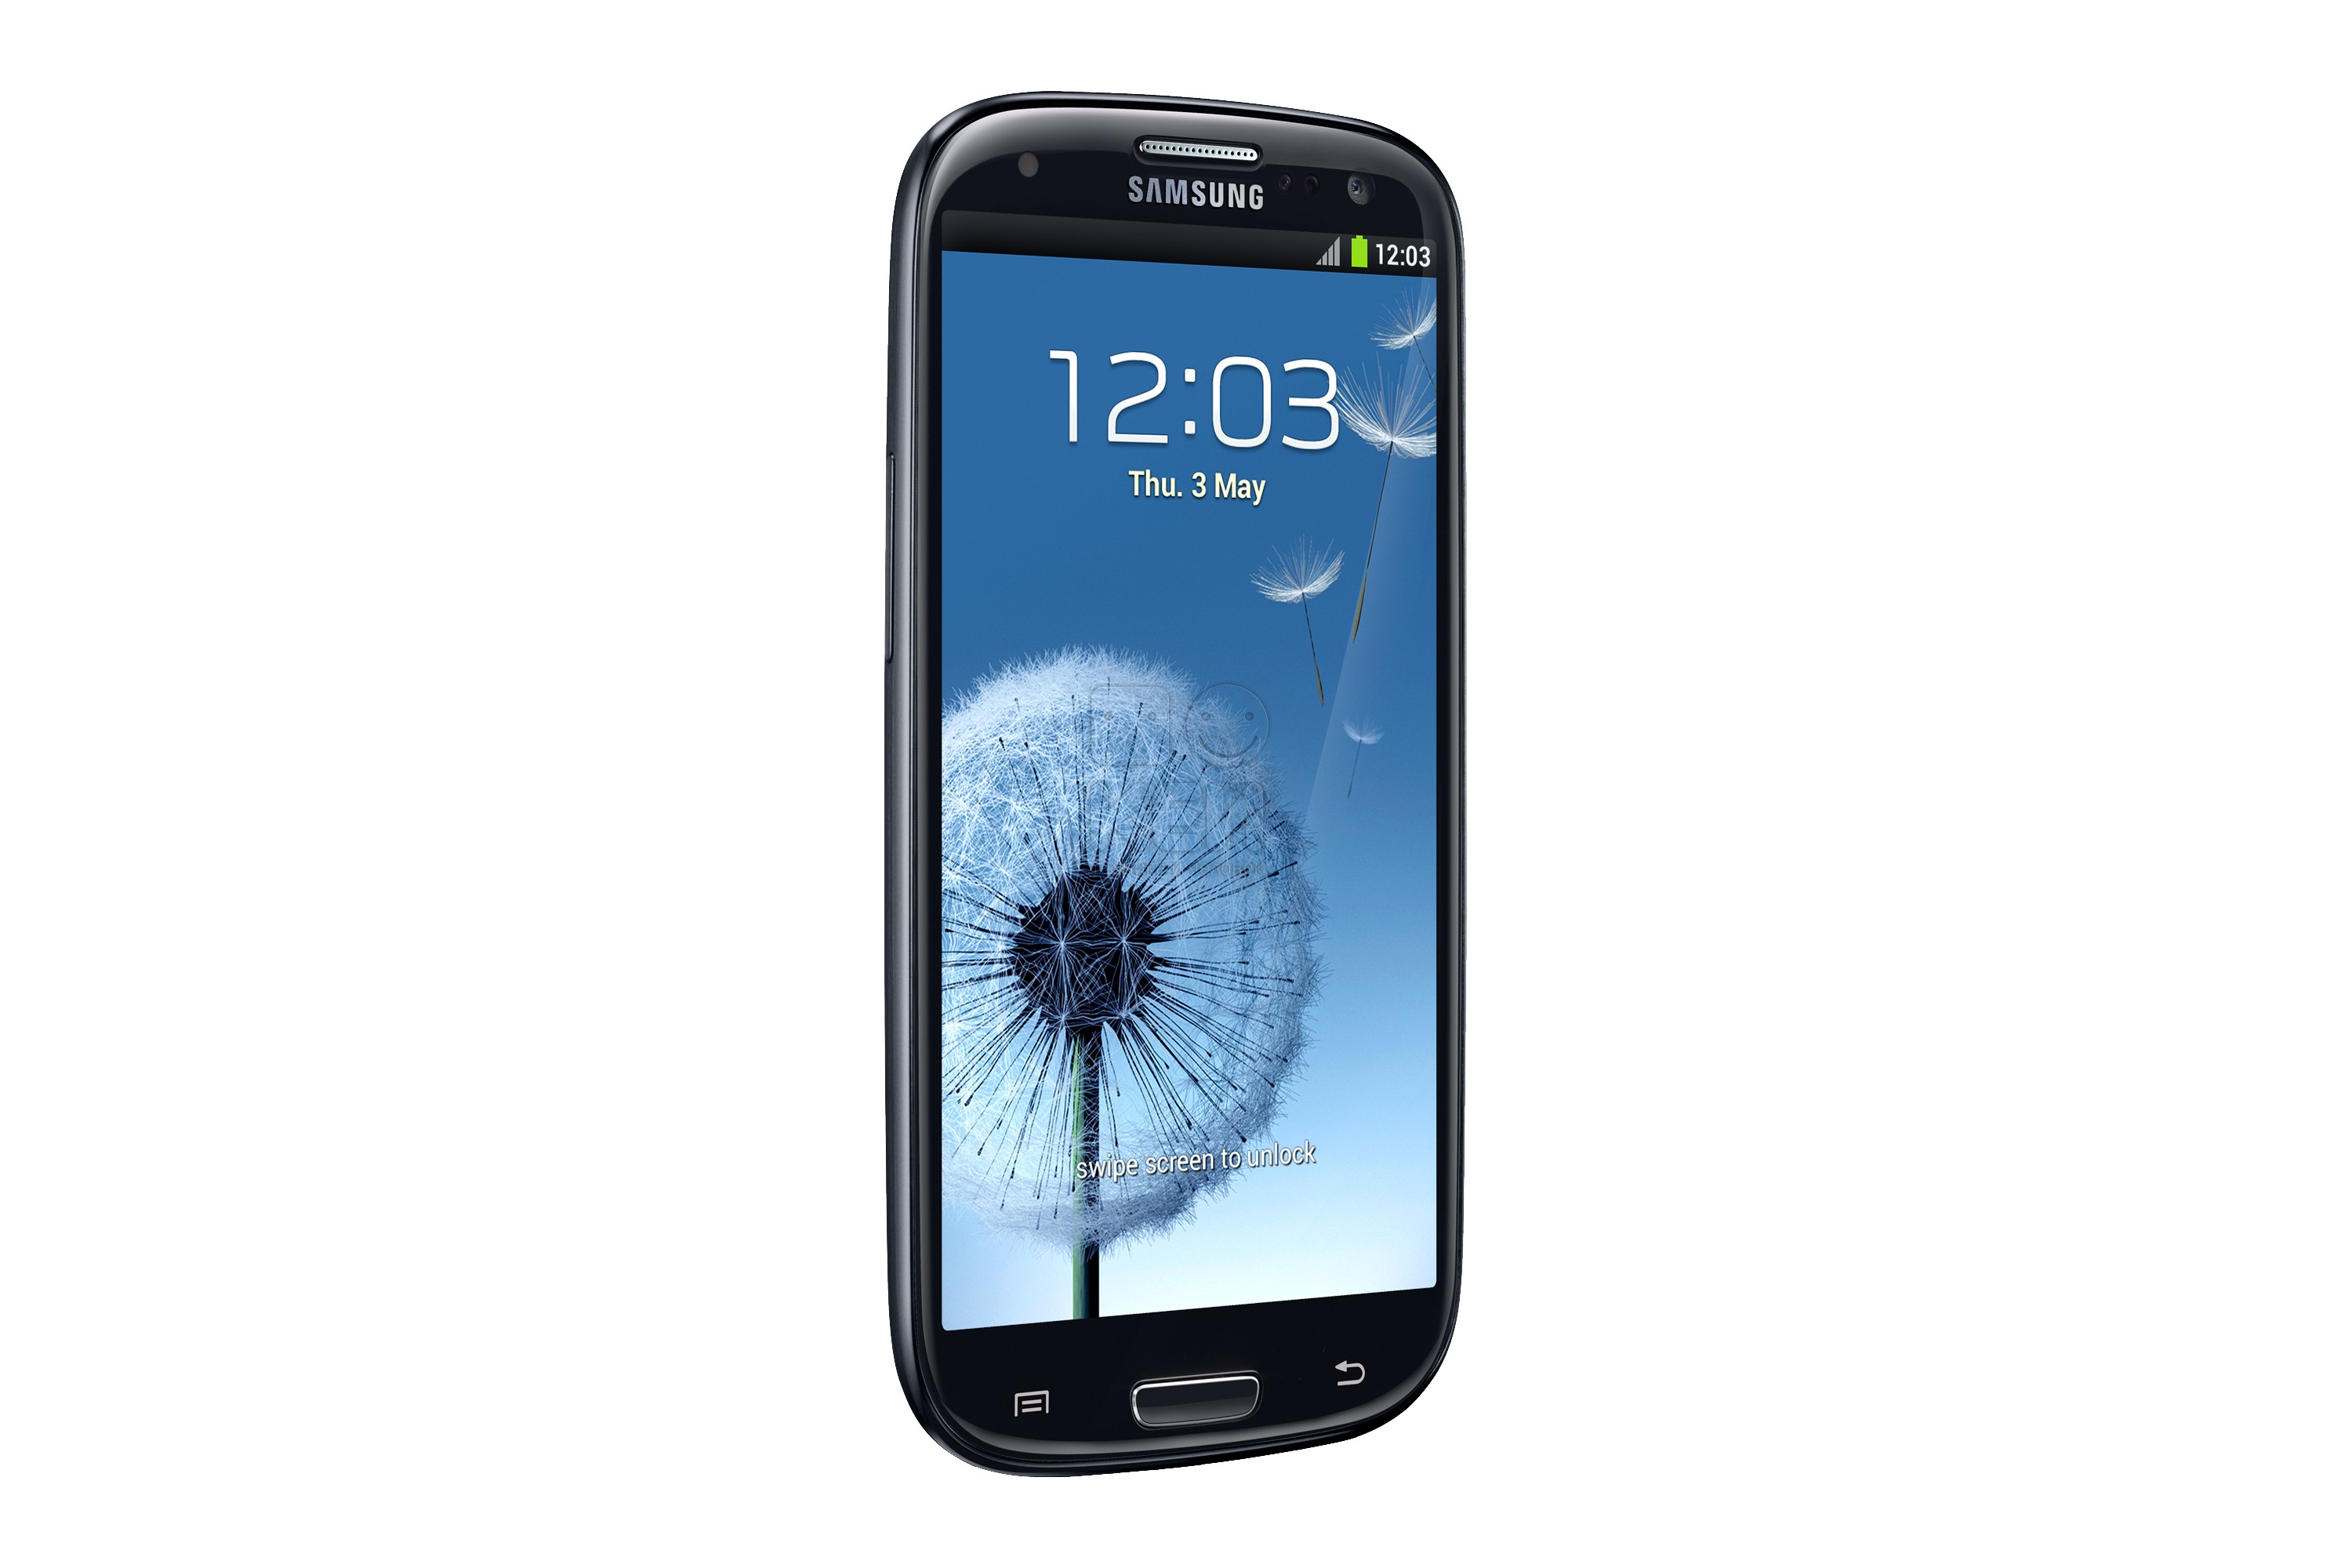 Samsung galaxy gt 3. Samsung Galaxy s3 i9300. Samsung Galaxy s III gt-i9300 16gb. Samsung Galaxy s3 Neo. Samsung Galaxy s3 Duos.